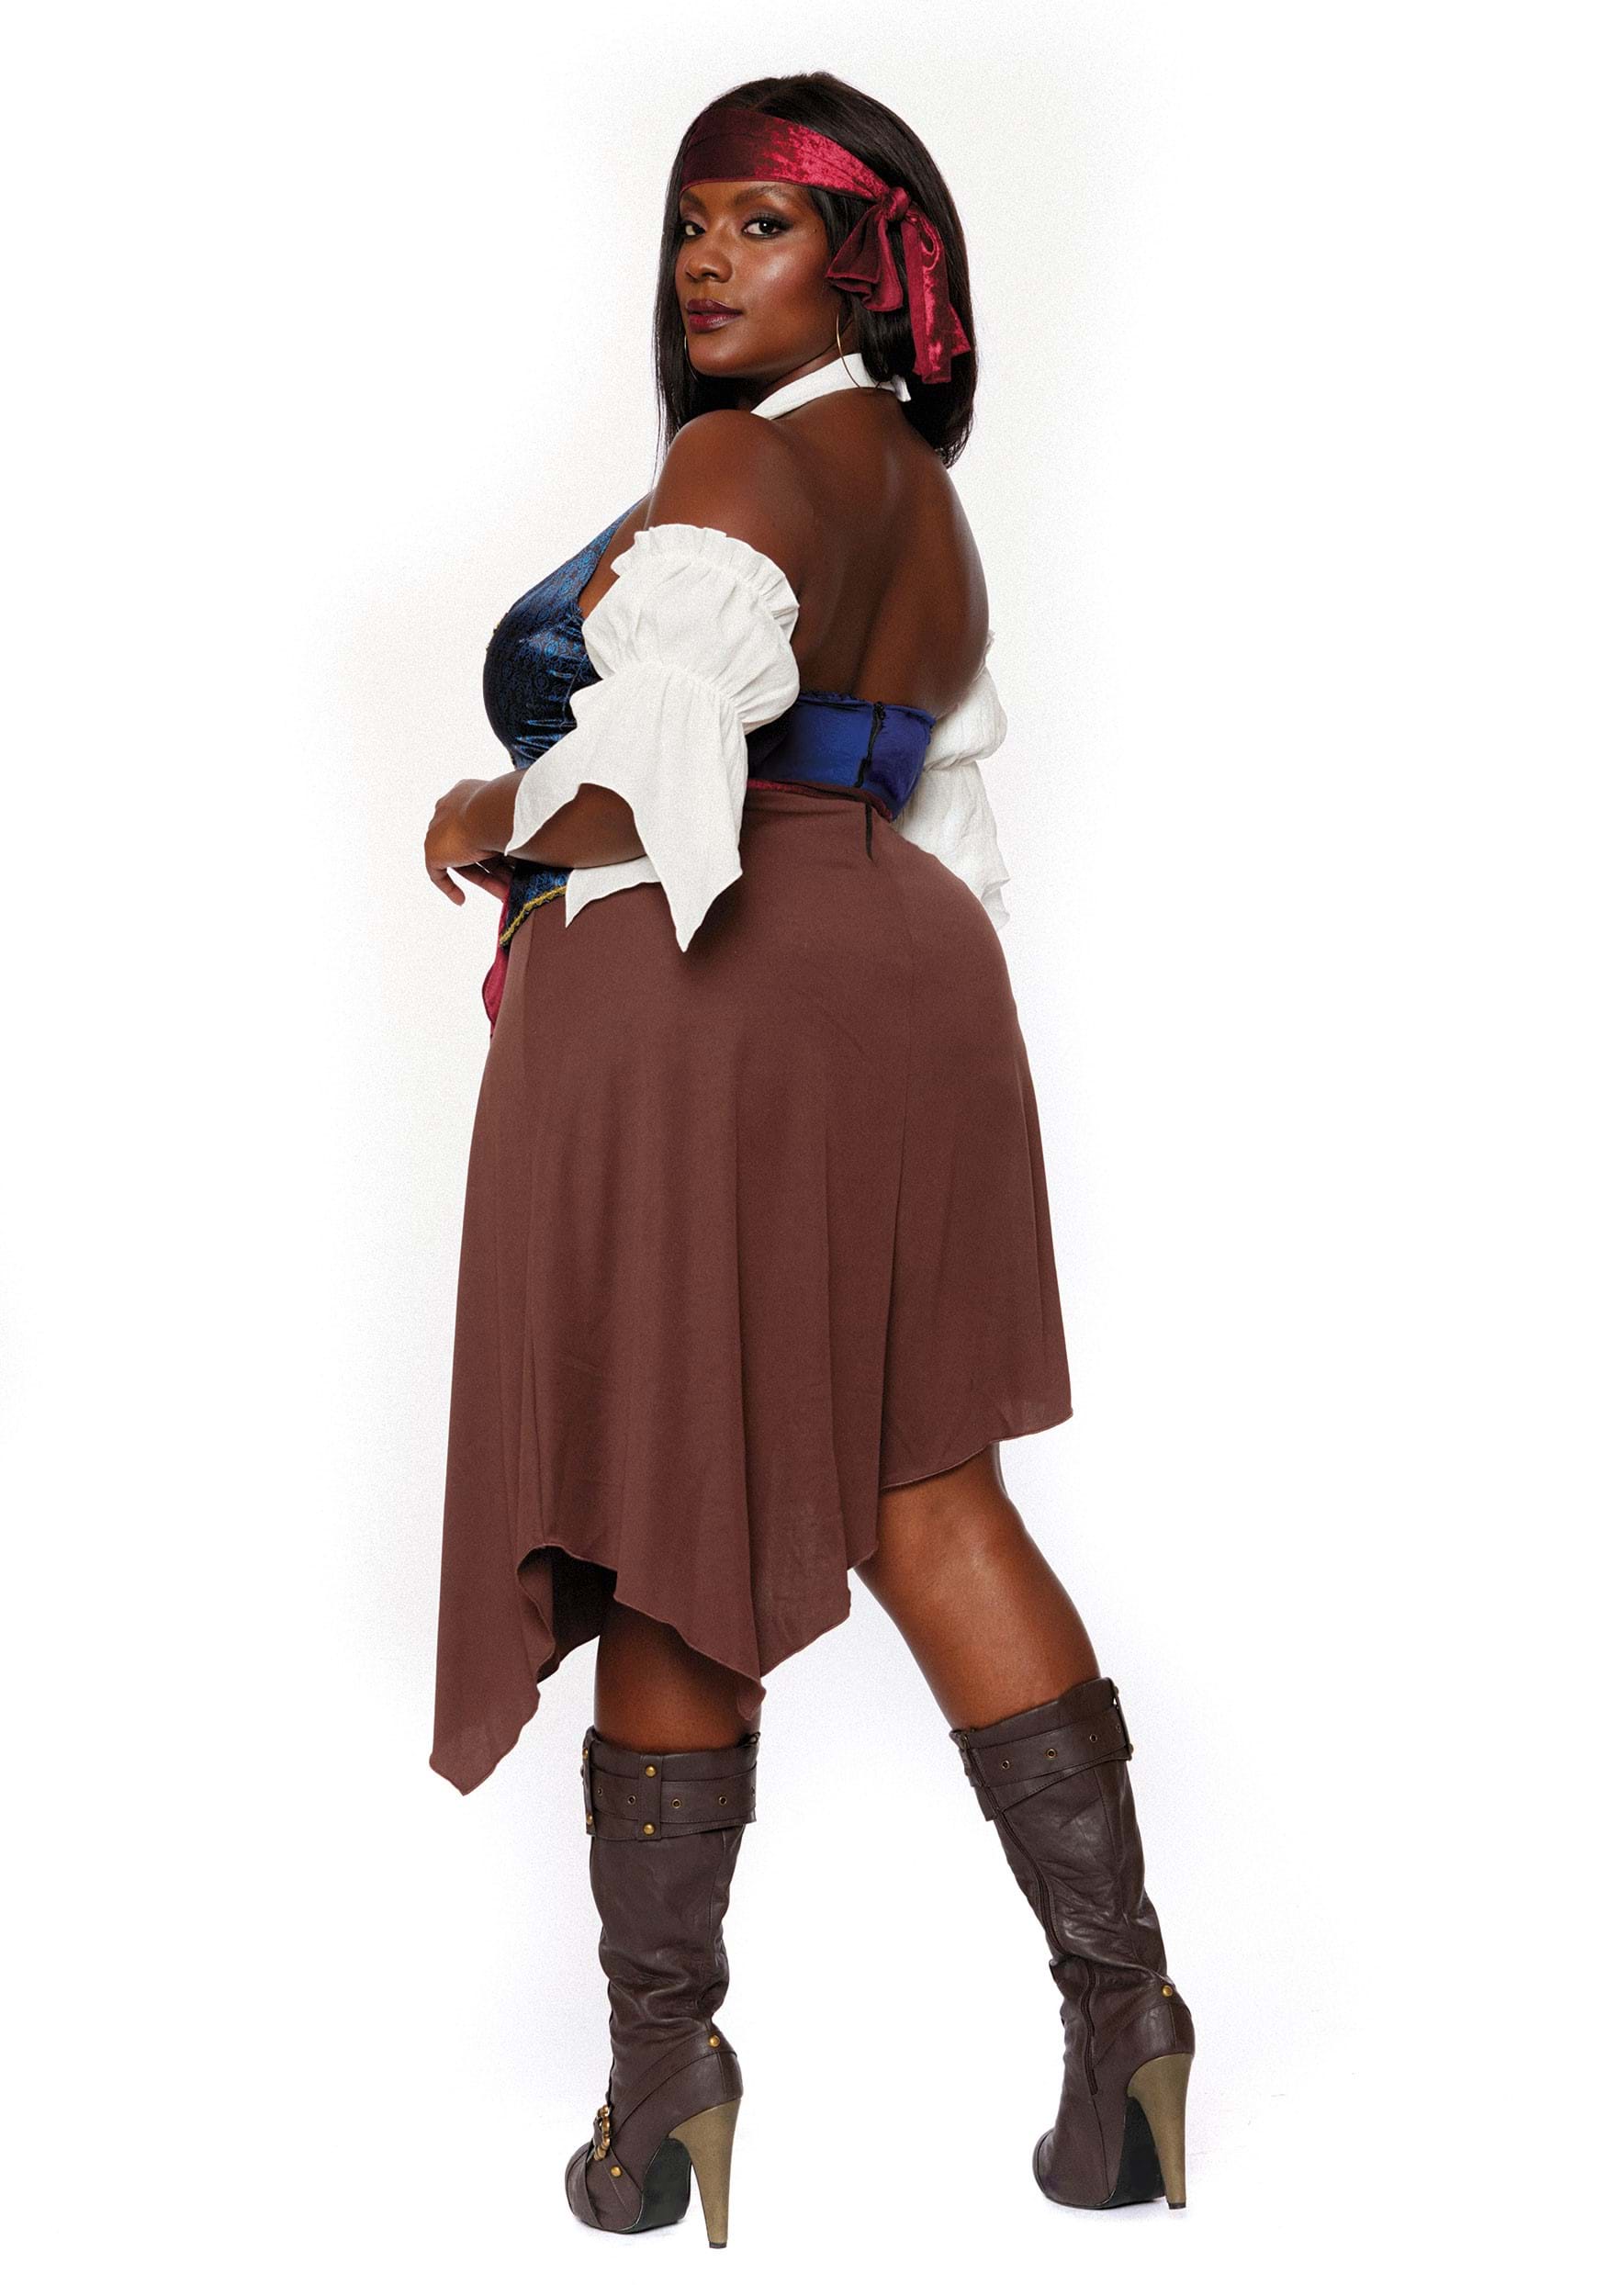 Plus Size Rogue Pirate Wench Women's Costume